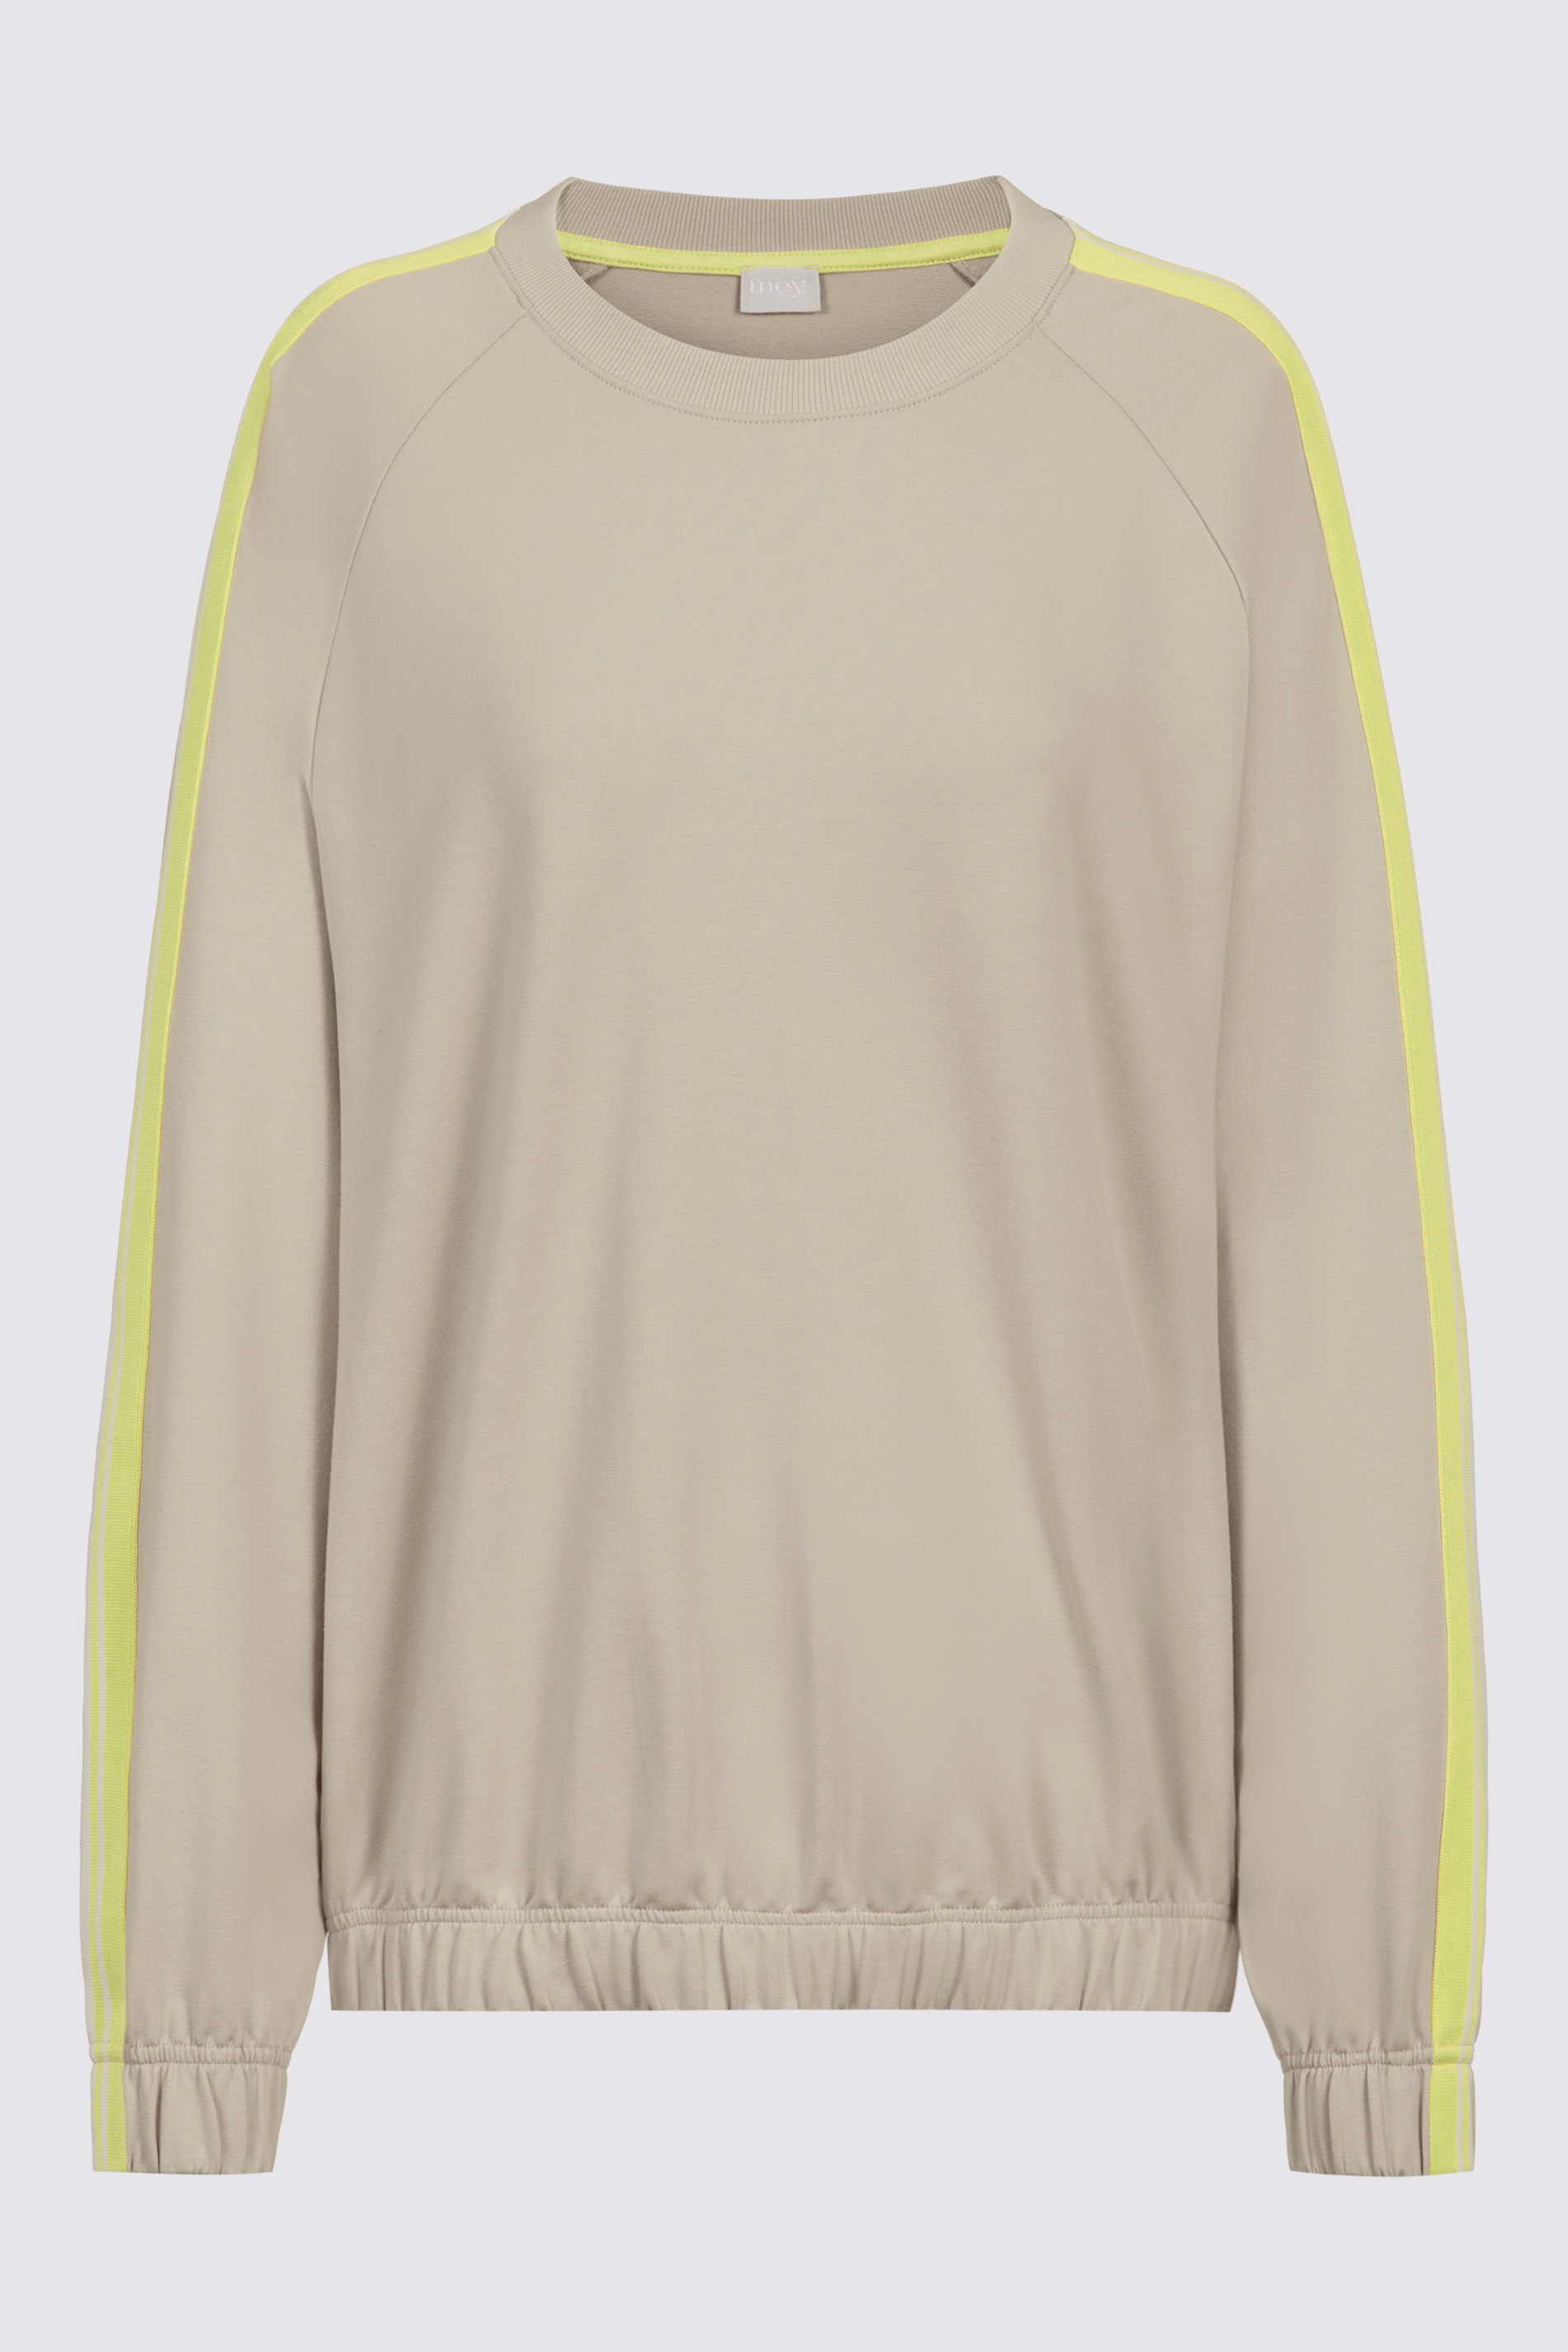 Sweater Serie Toni Uitknippen | mey®